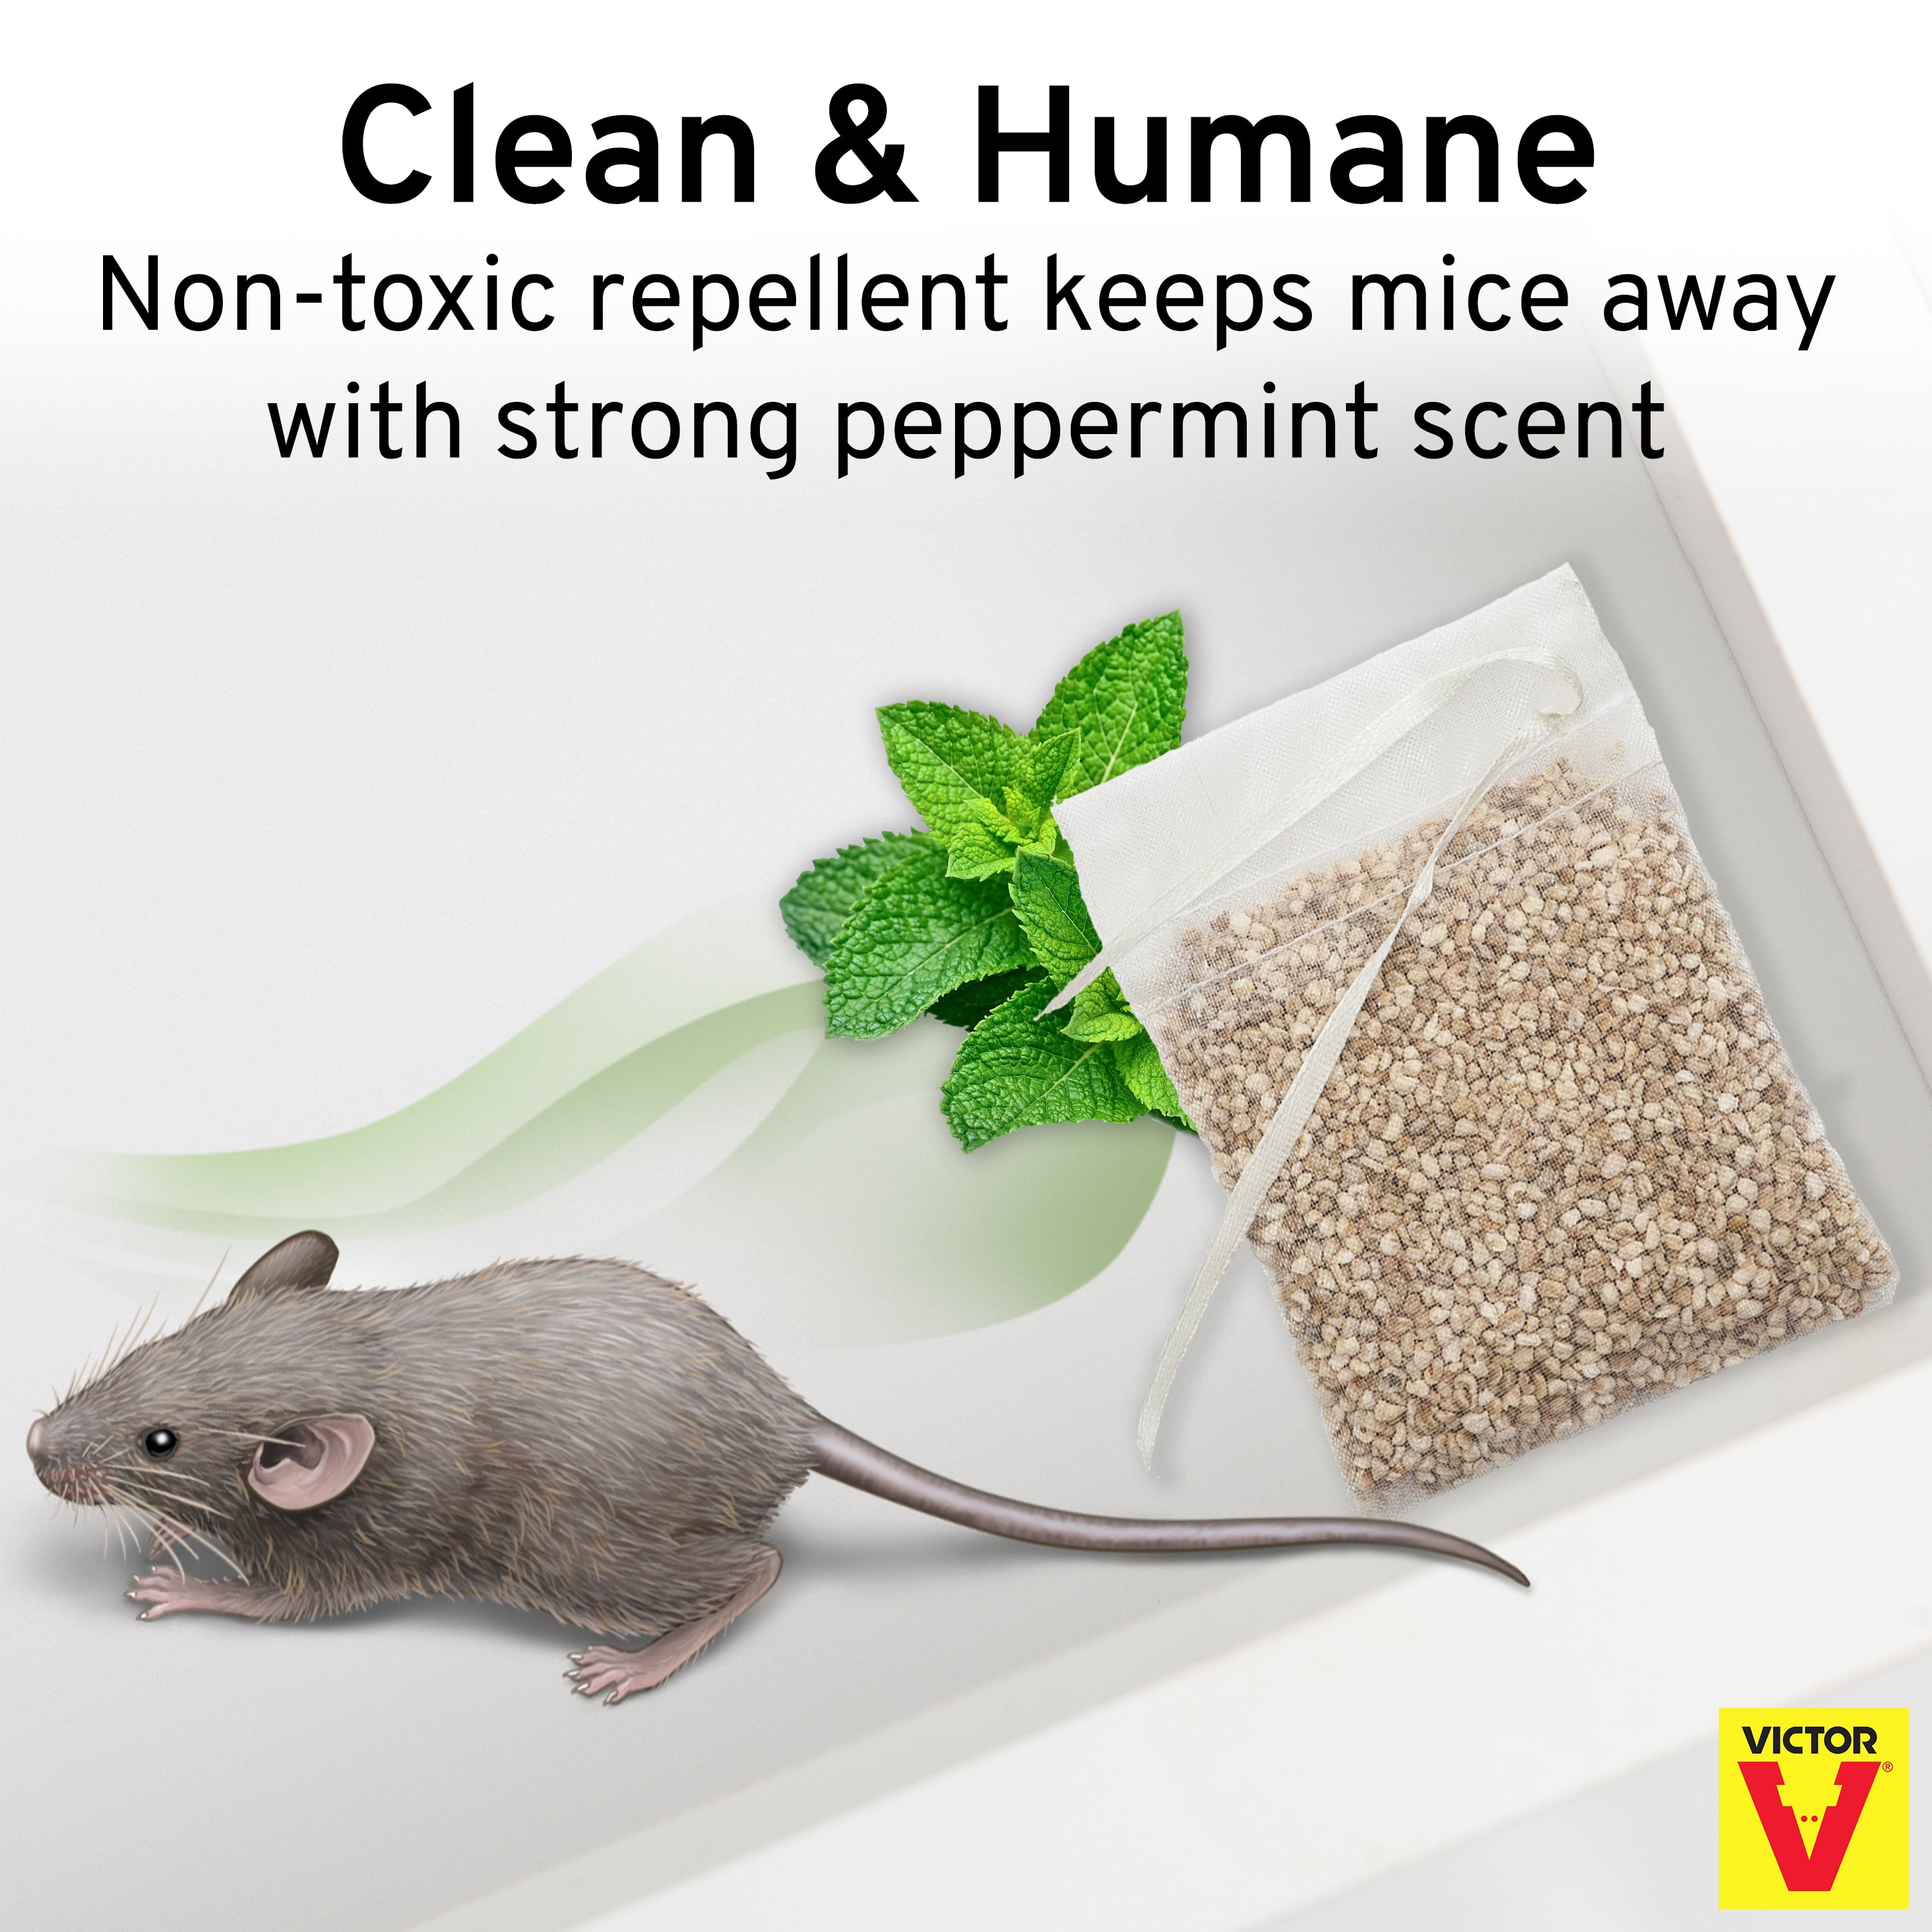 SEALUXE Rodent Repellent,Mouse Repellent Peppermint,Rat Repellent,Mice Repellent Peppermint,Rat Deterrent,Mouse Deterrent Indoor,Mouse Away,Peppermint Oil to Repel Mice and Rats 2-Pack 